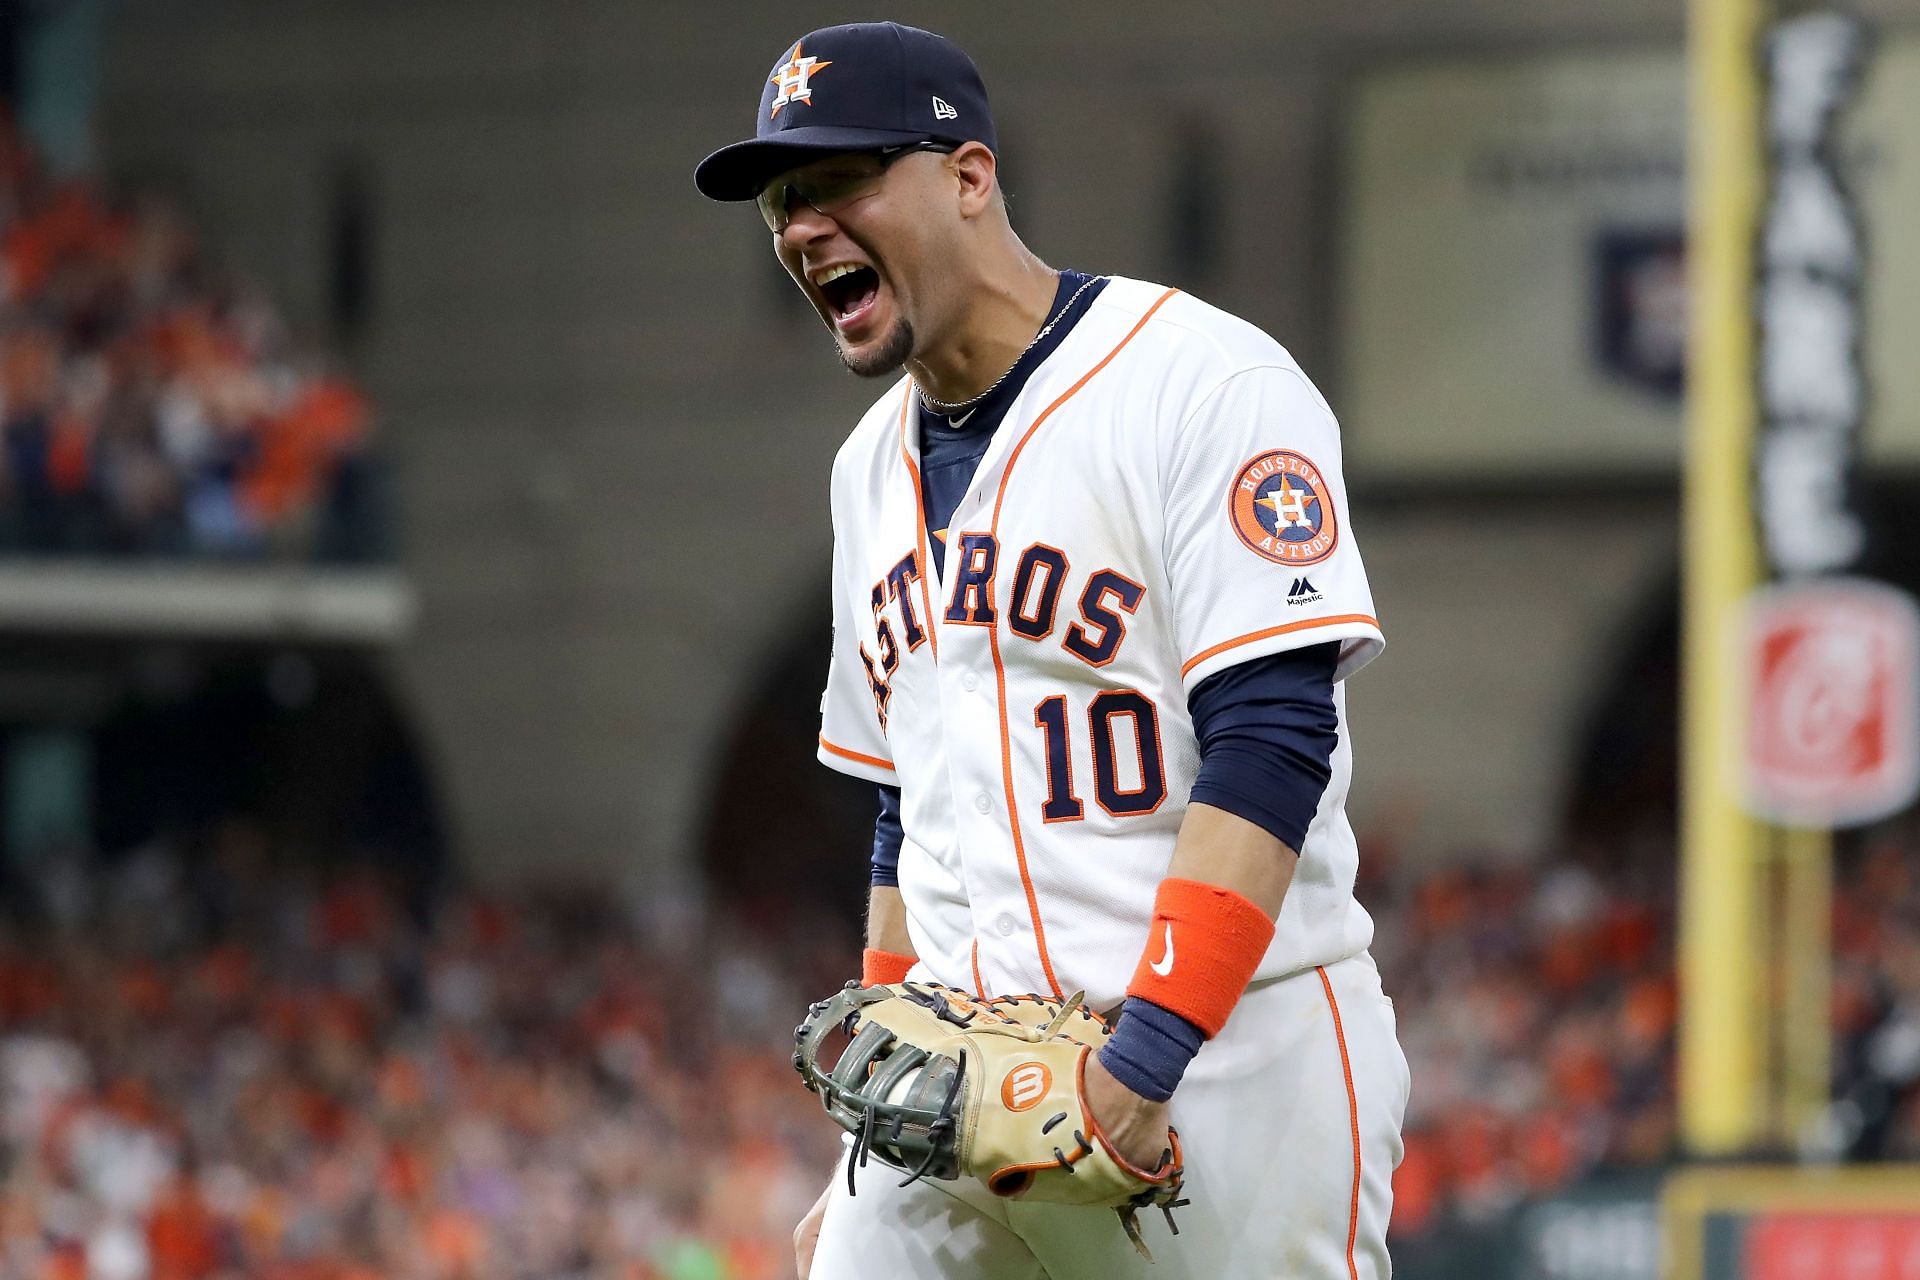 Houston Astros: Placing Yuli Gurriel at second base likely won't work